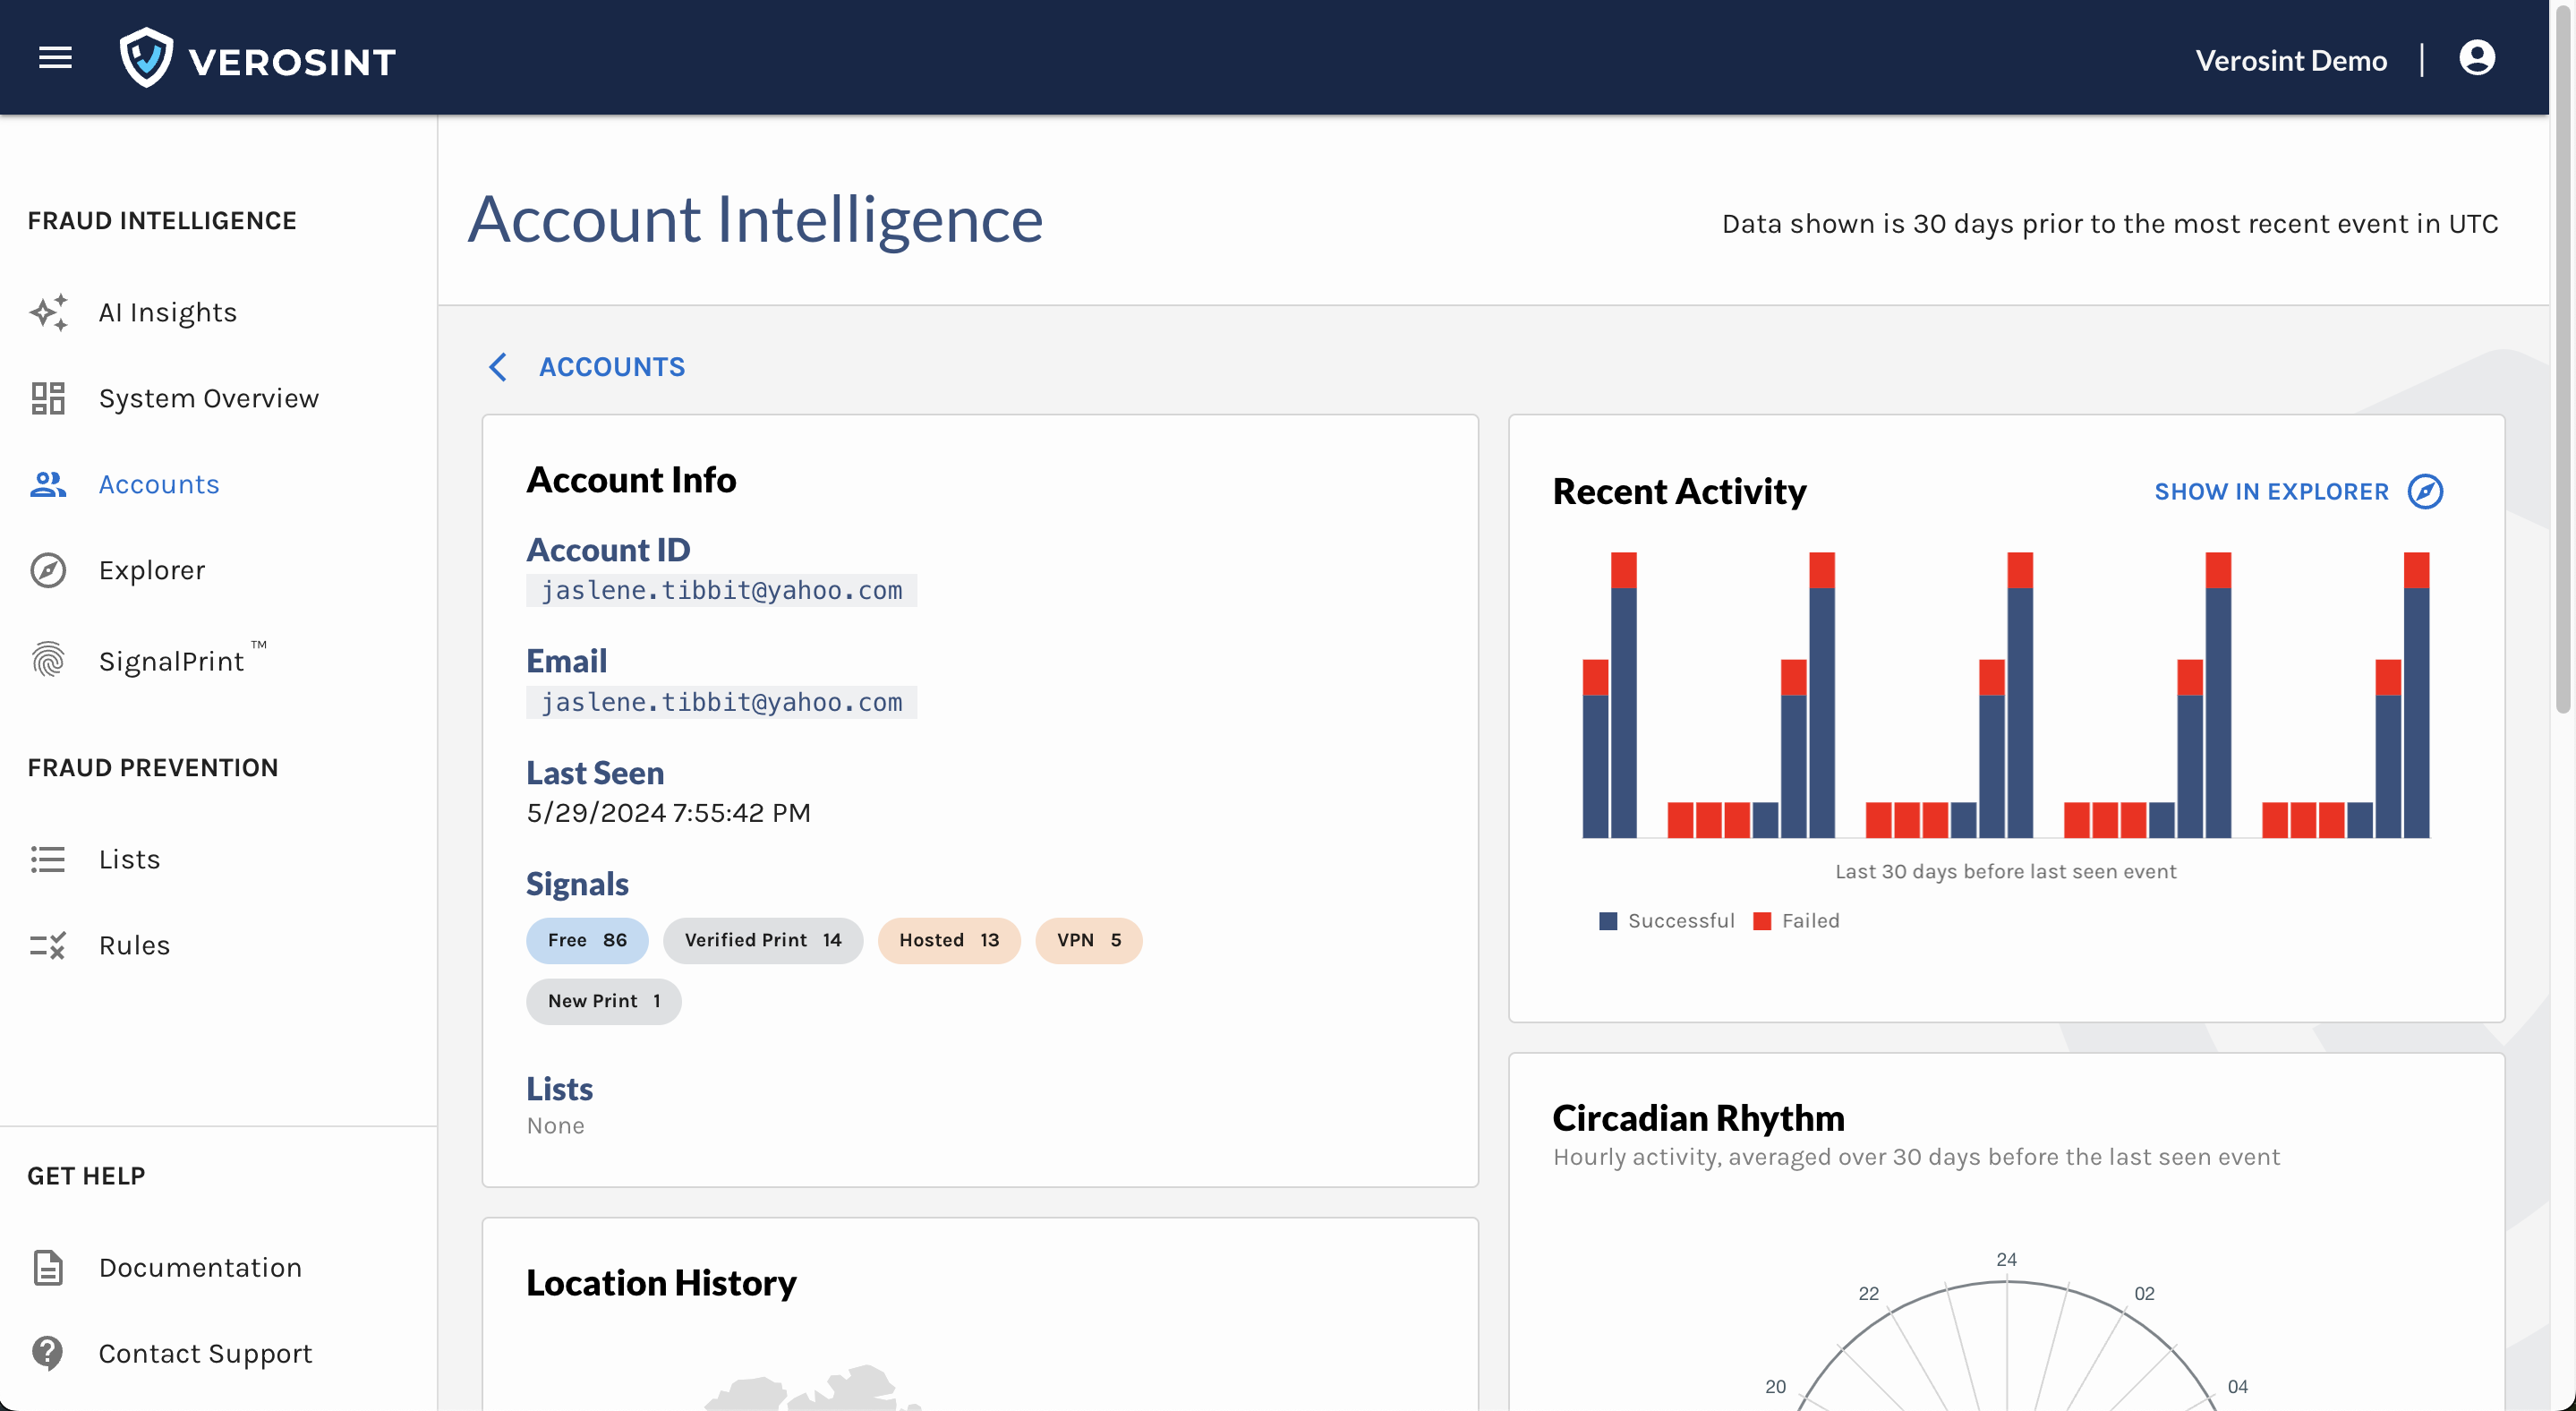 Each Account Intelligence page shows 30 days of activity prior to the Last Seen event for that account